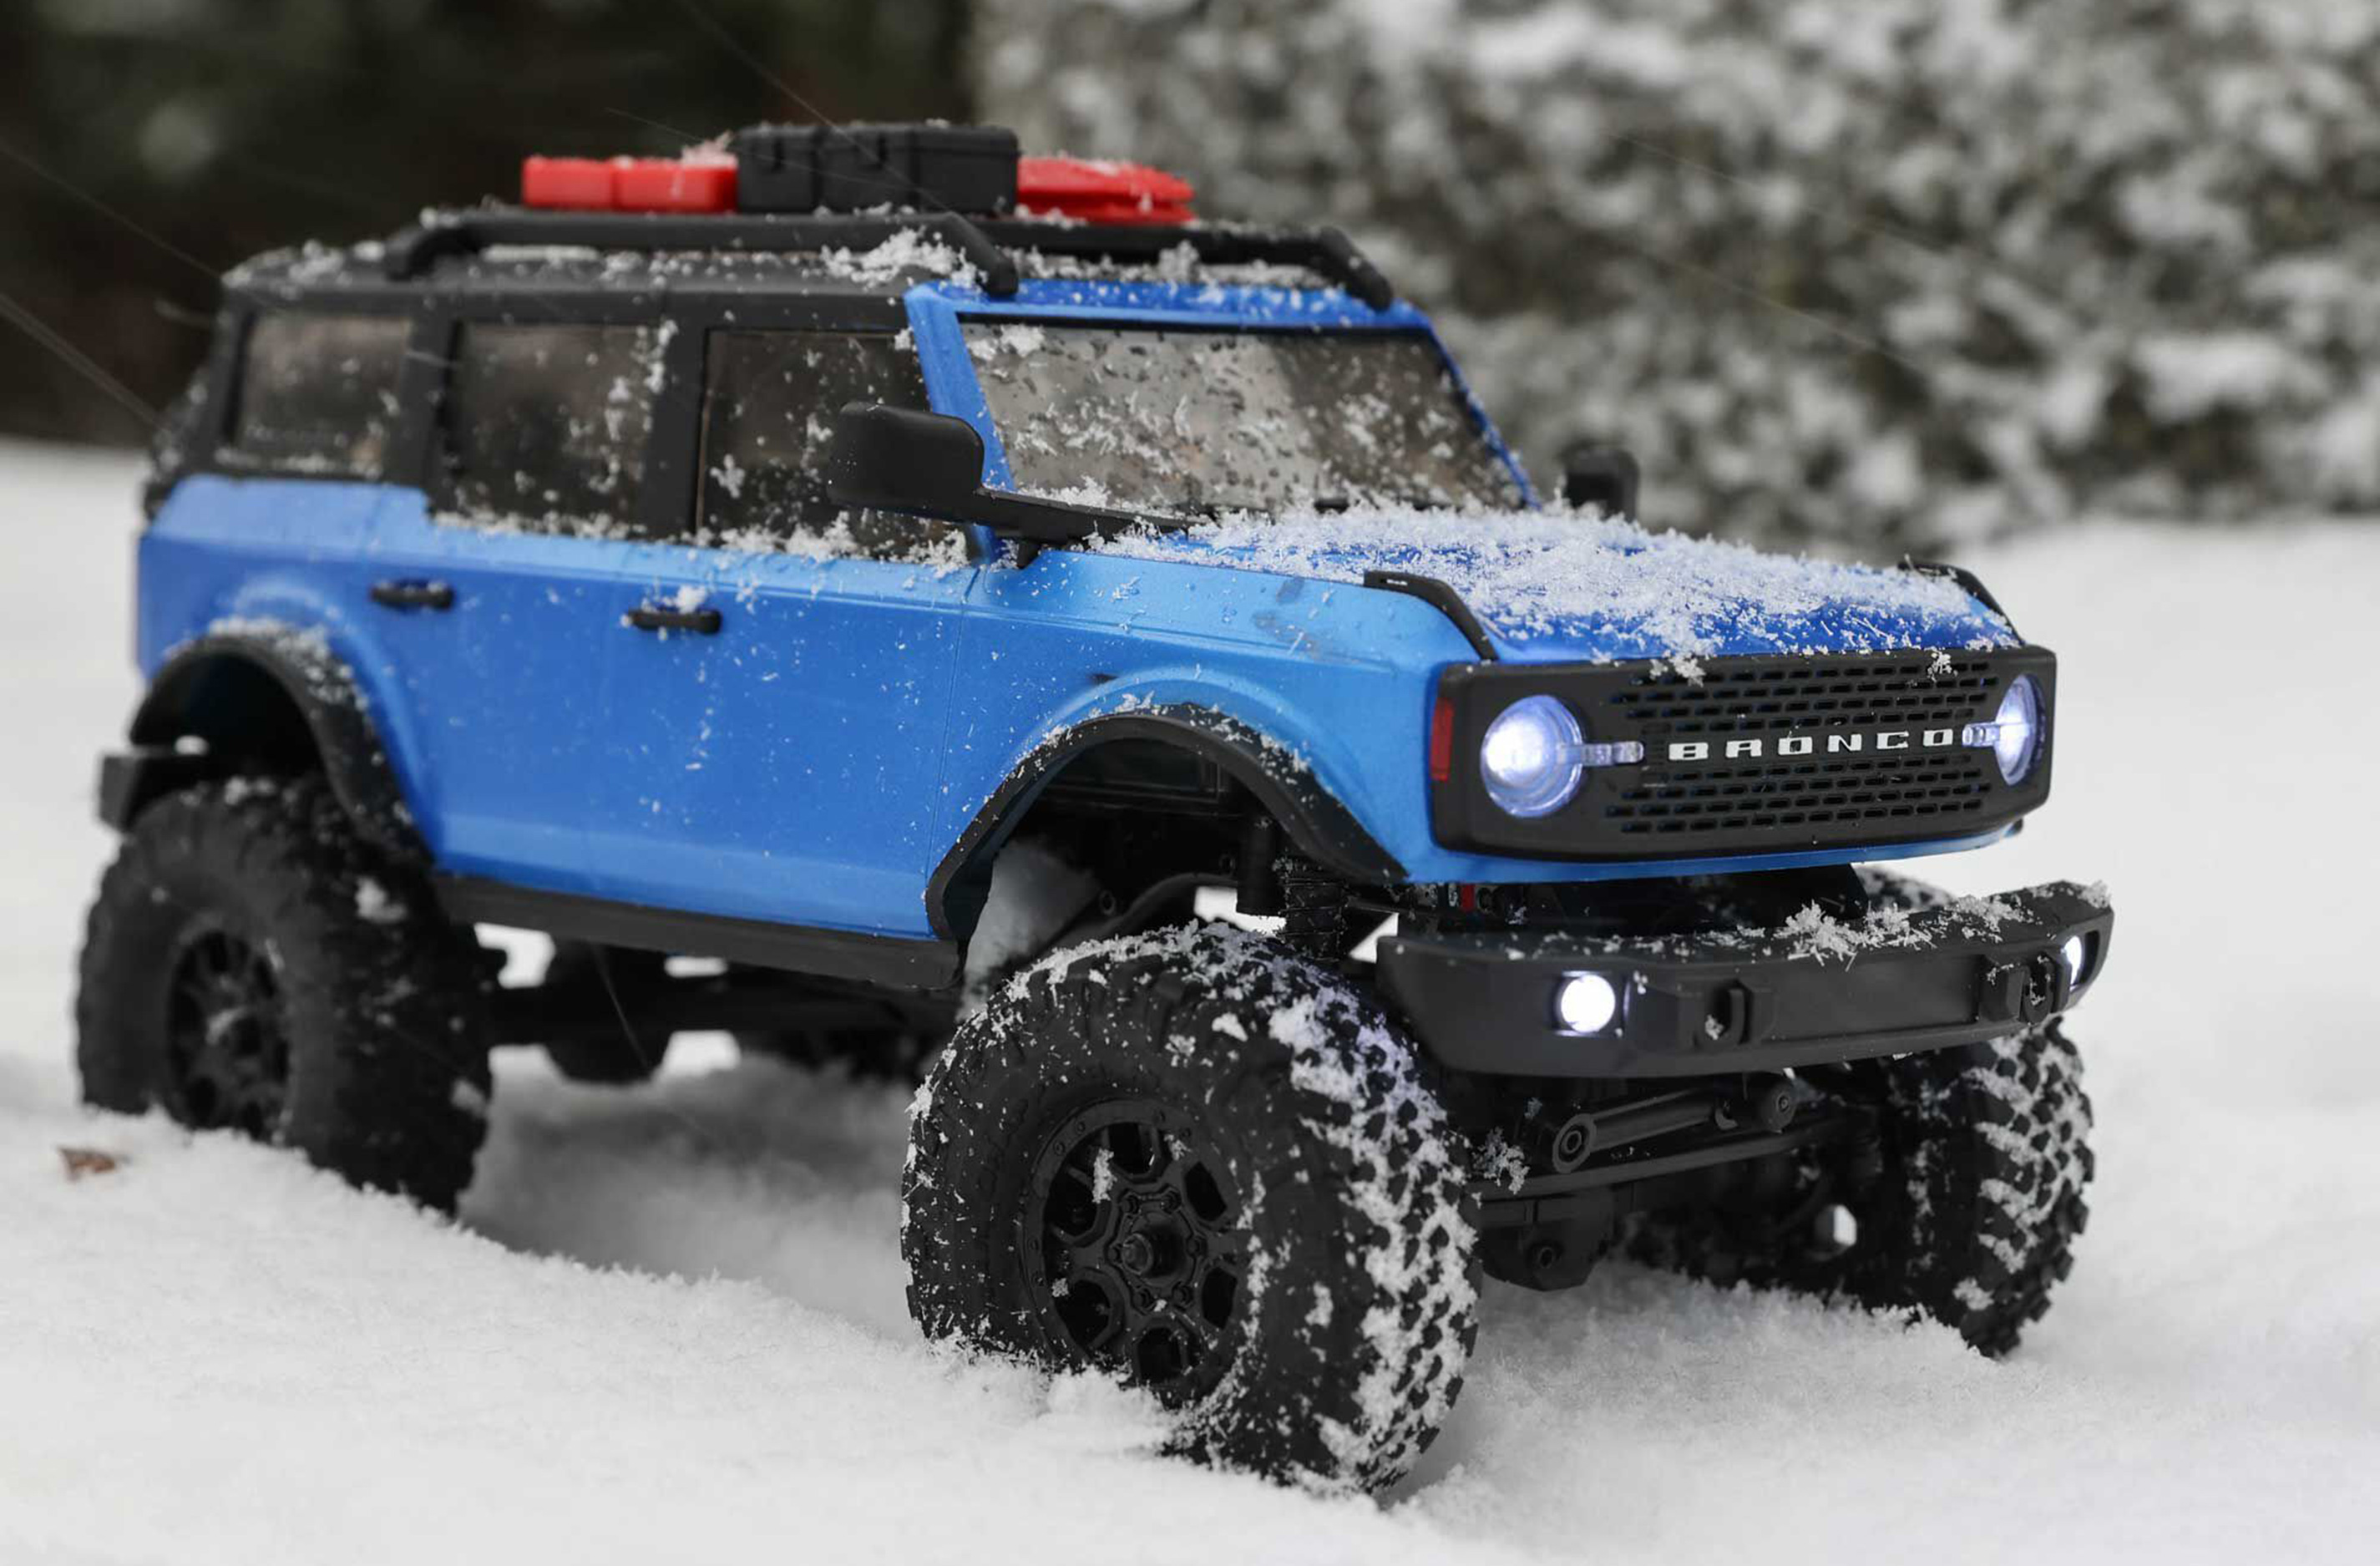 AXI00006T3 1:24 SCX24 2021 Ford Bronco 4WD Truck Brushed RTR, Blau